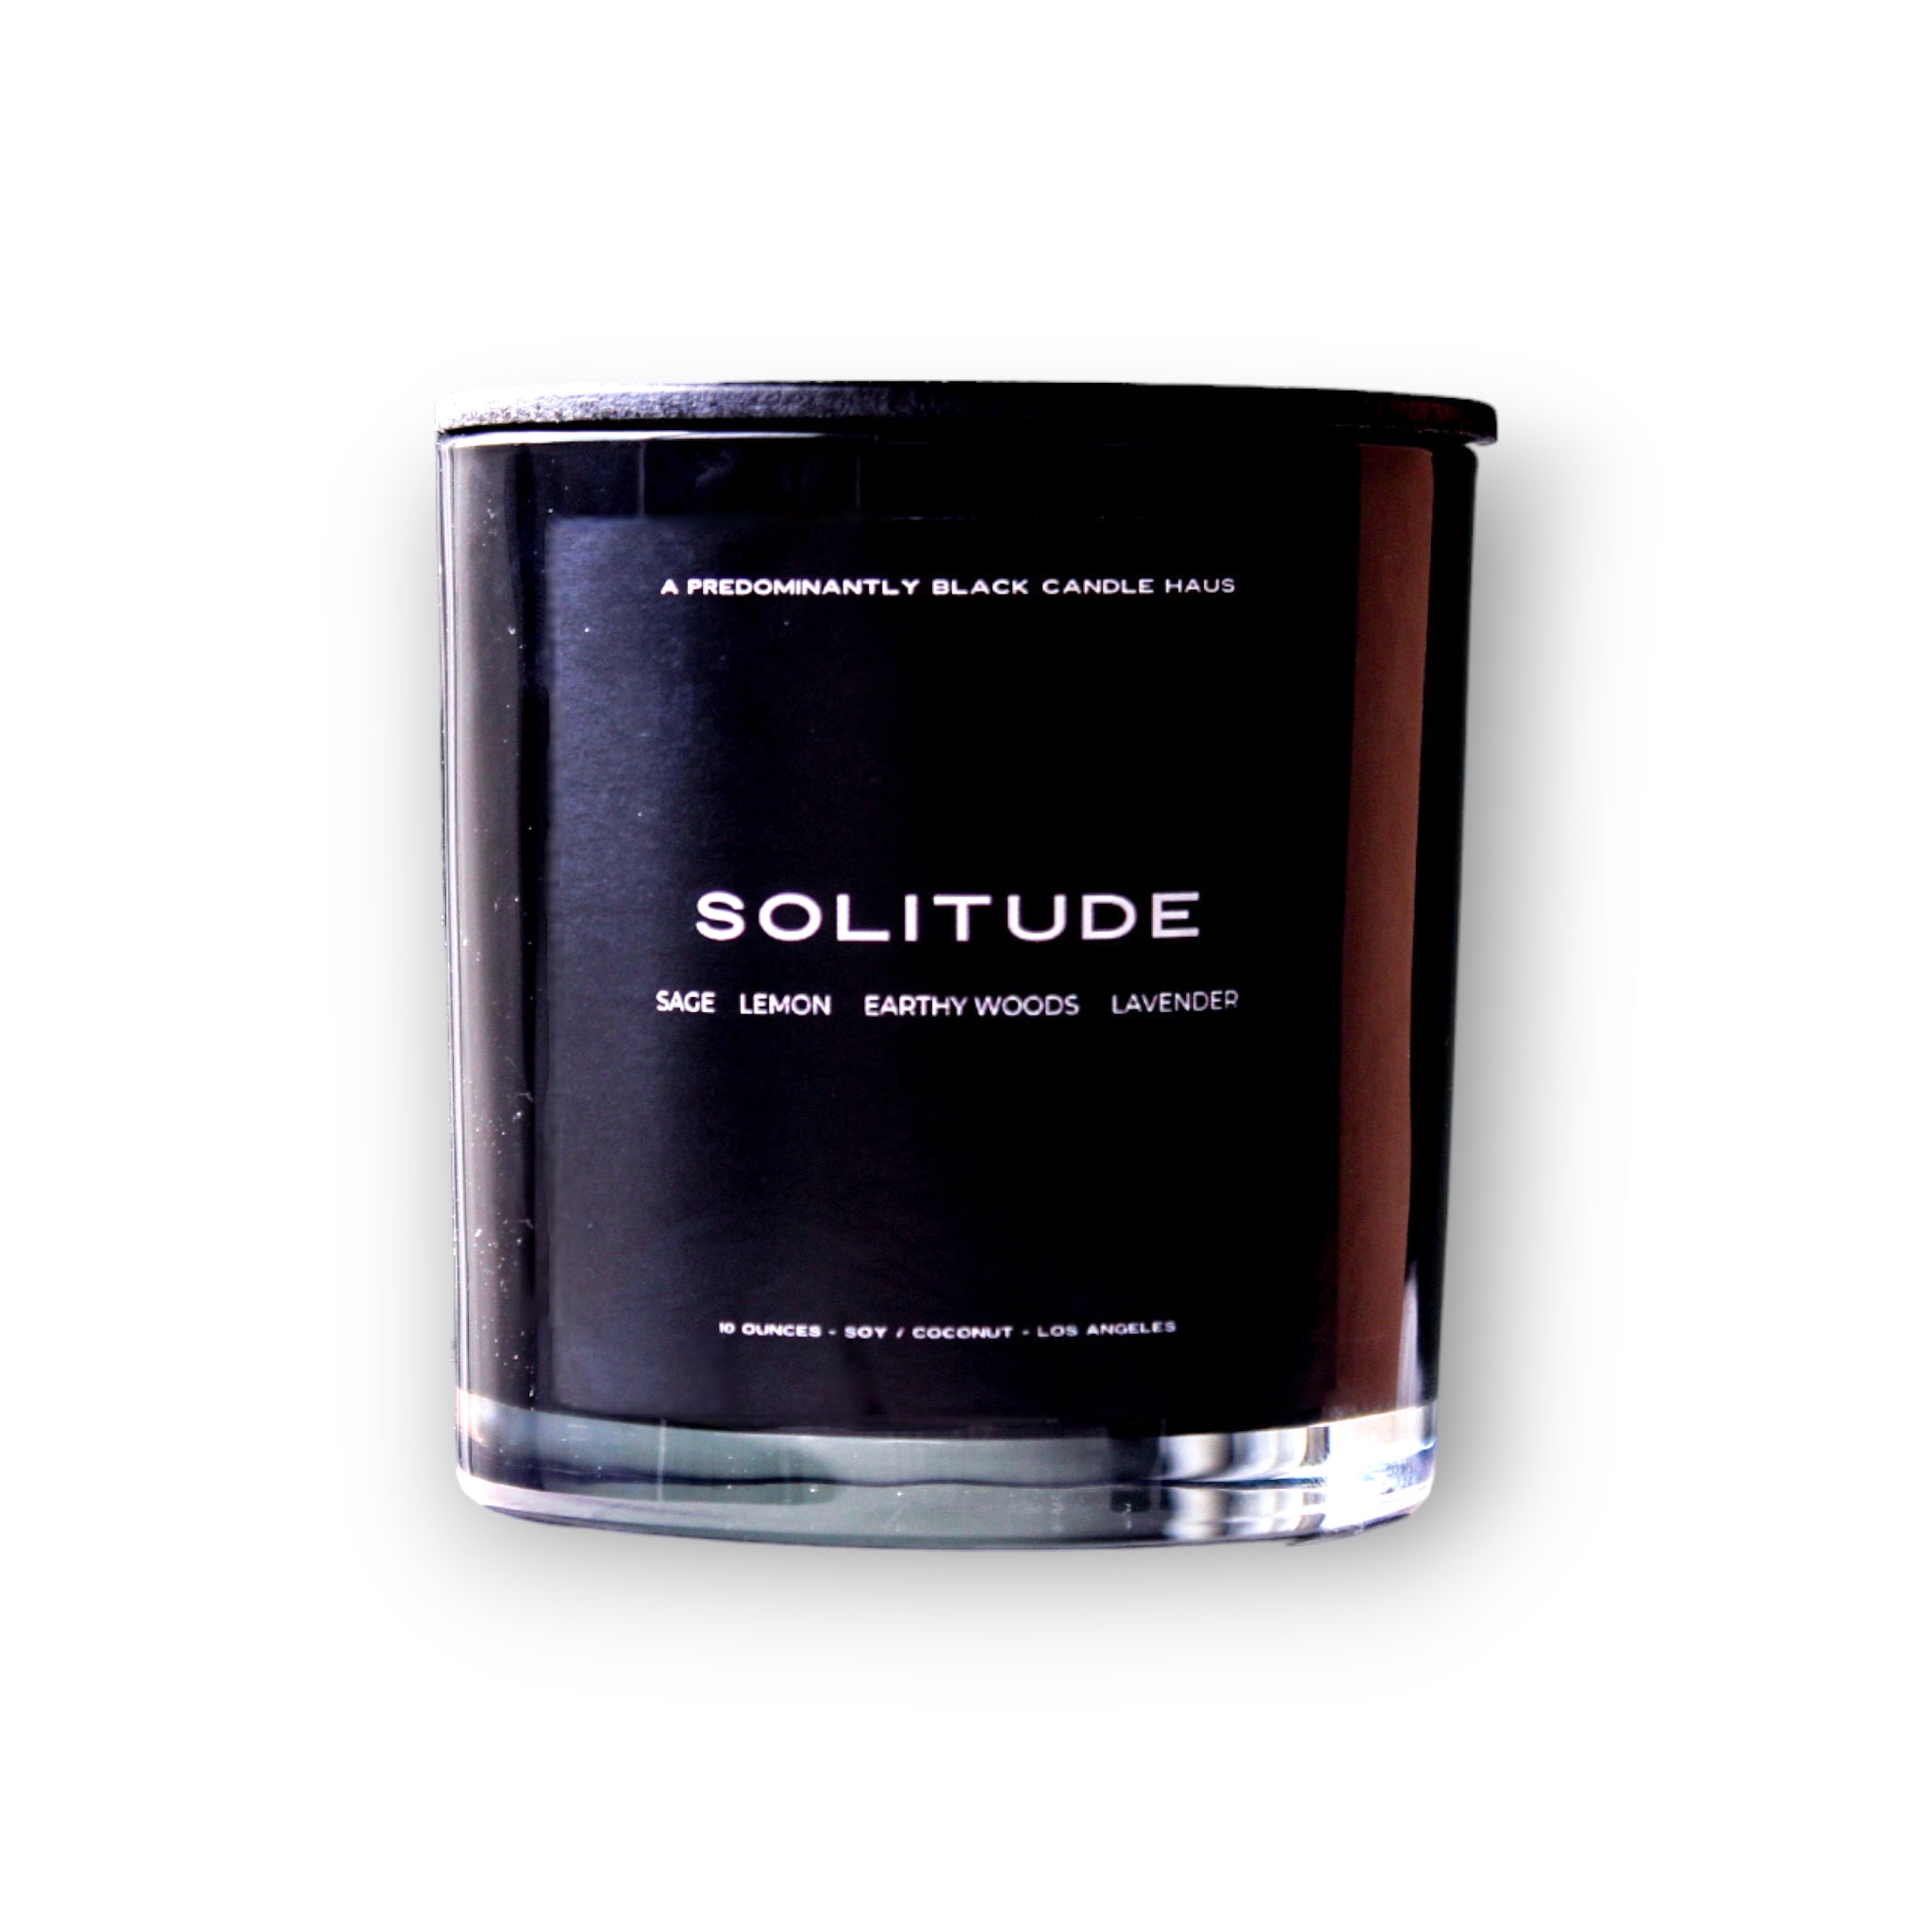 A sleek predominantly black SOLITUDE CANDLE labeled "solitude" with notes of sage, lemon, earthy woods, and lavender, presented against a clean white background.